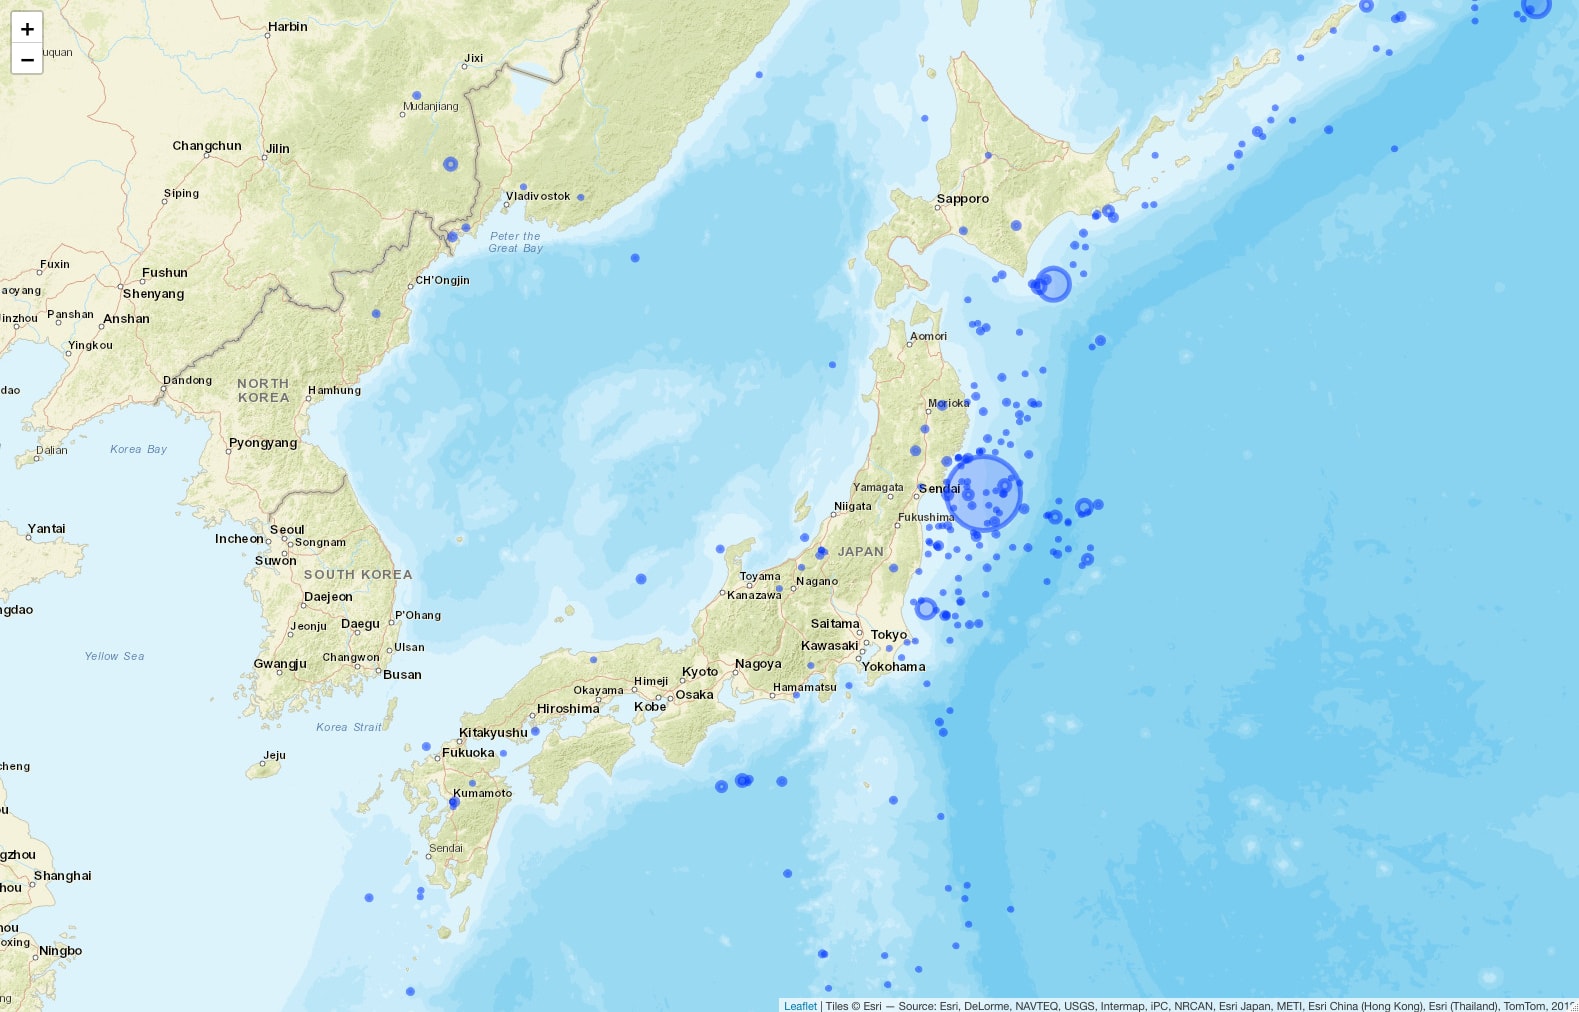 Image 5 - Geomap of Earthquakes near Japan from 2001 to 2018 (styled markers)